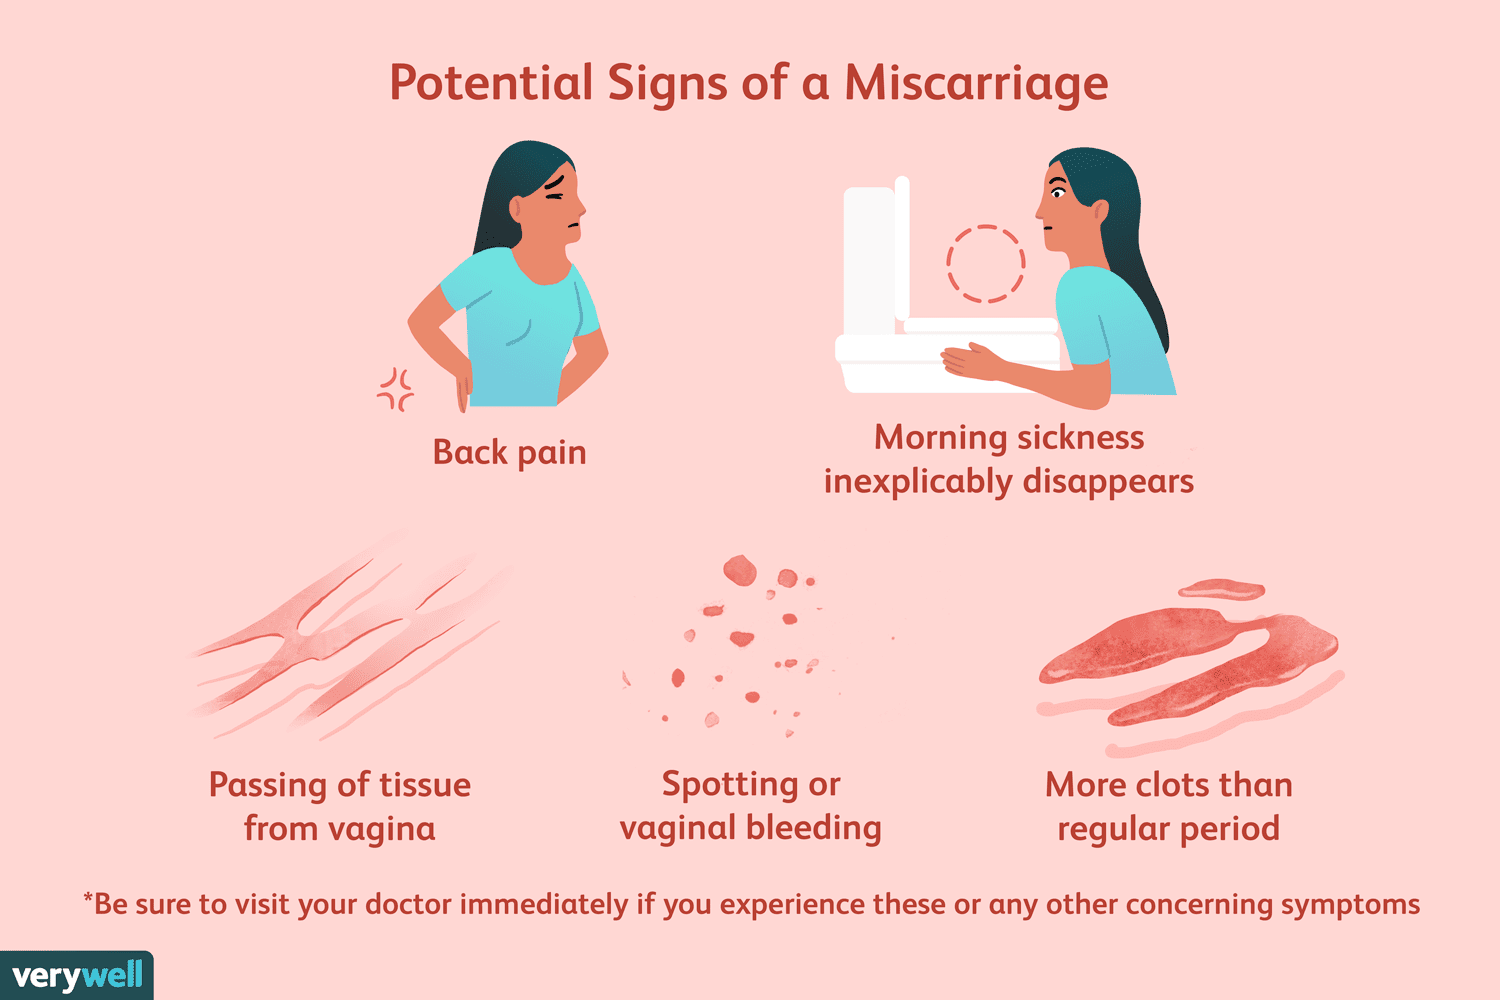 Signs of a miscarriage
